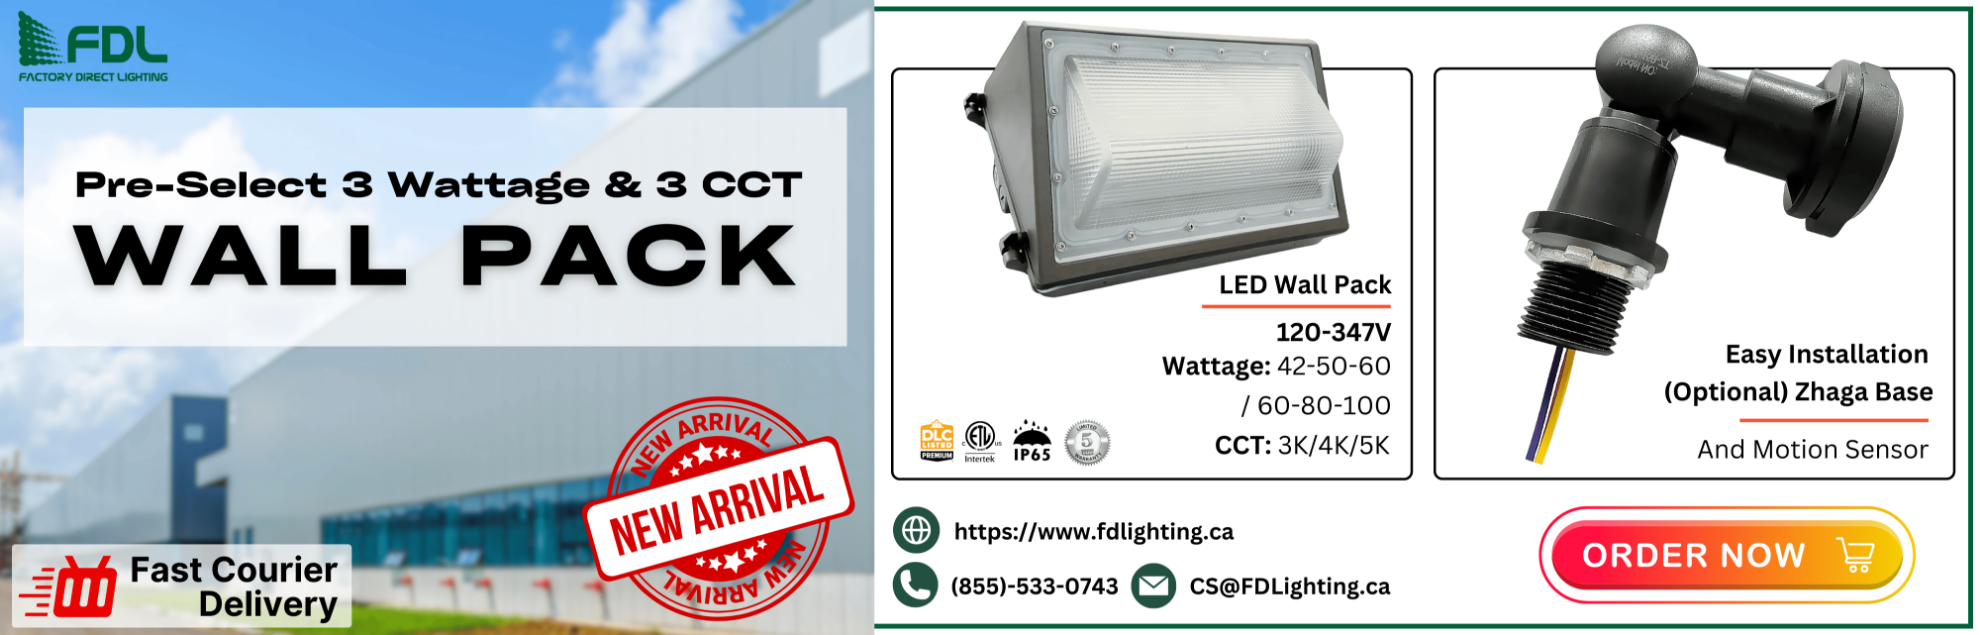 New Product Pre-Select 3 Wattage & 3CCT Wall Pack